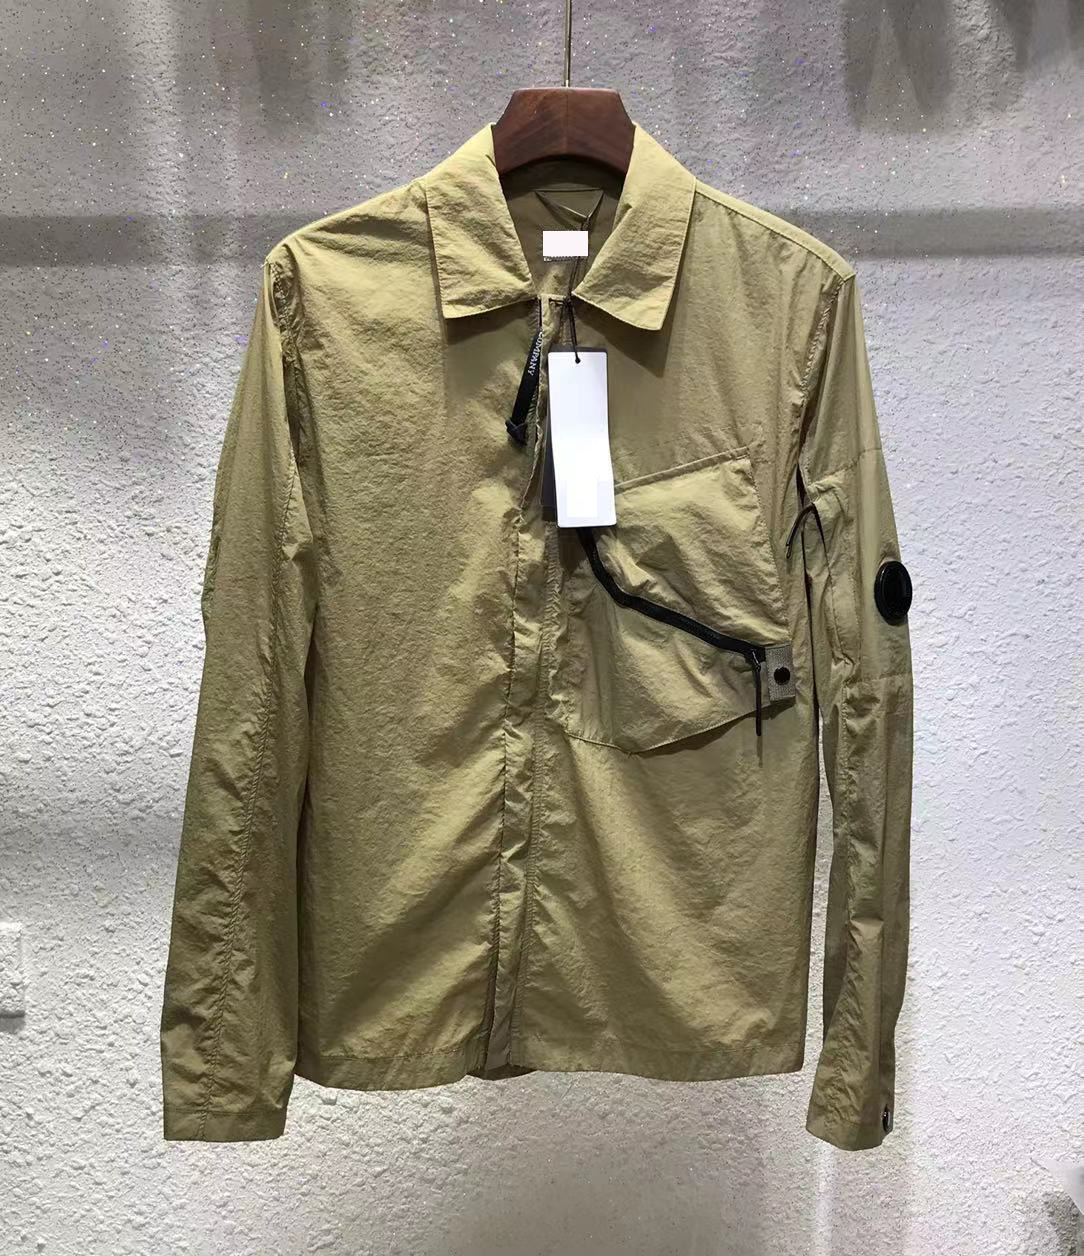 

C P topstoney konng gonng spring and summer thin jacket fashion brand islandss coat outdoor sun proof windbreaker Sunscreen clothing Waterpr, Supplement (not shipped separately)